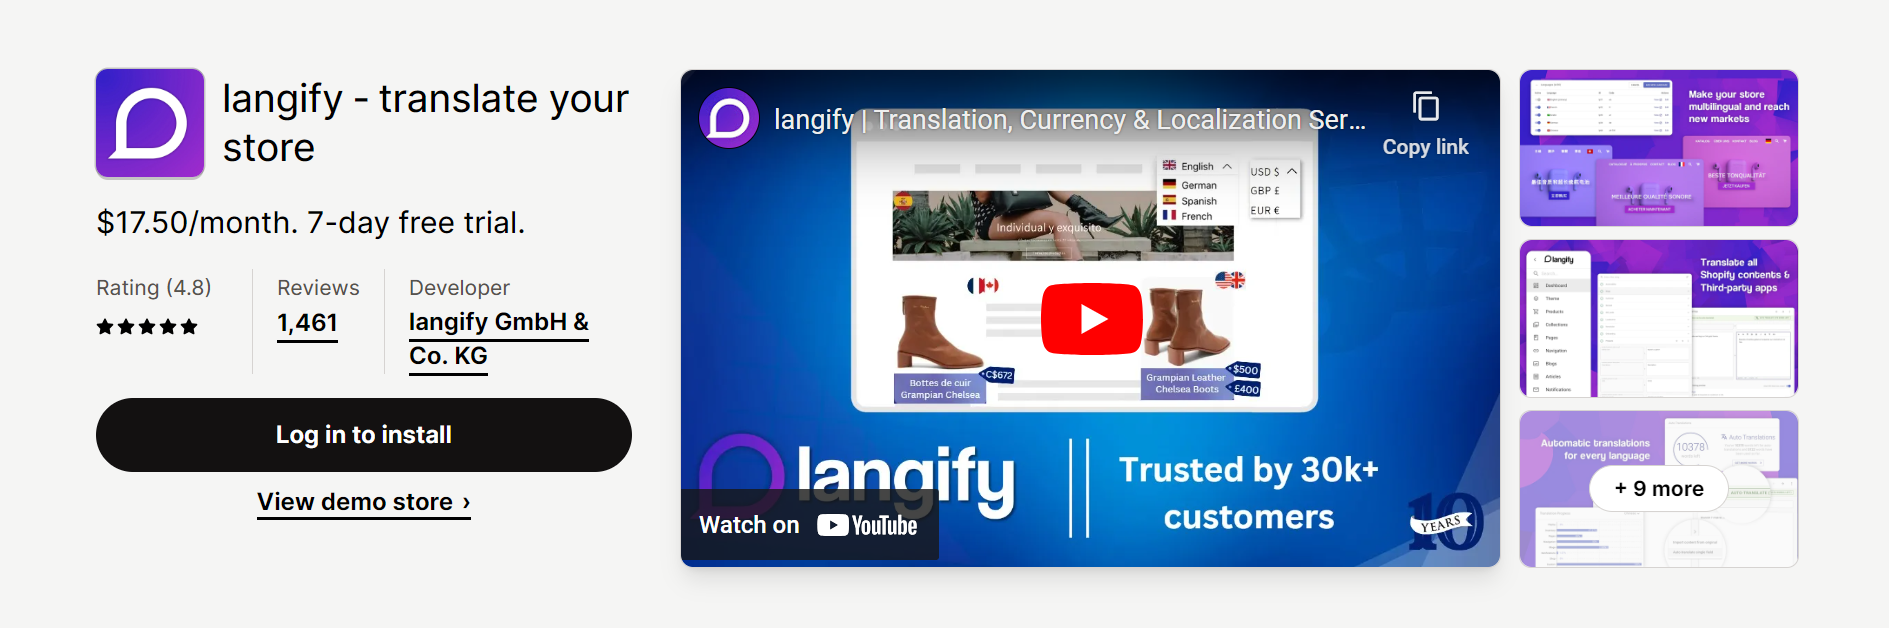 langify ‑ translate your store